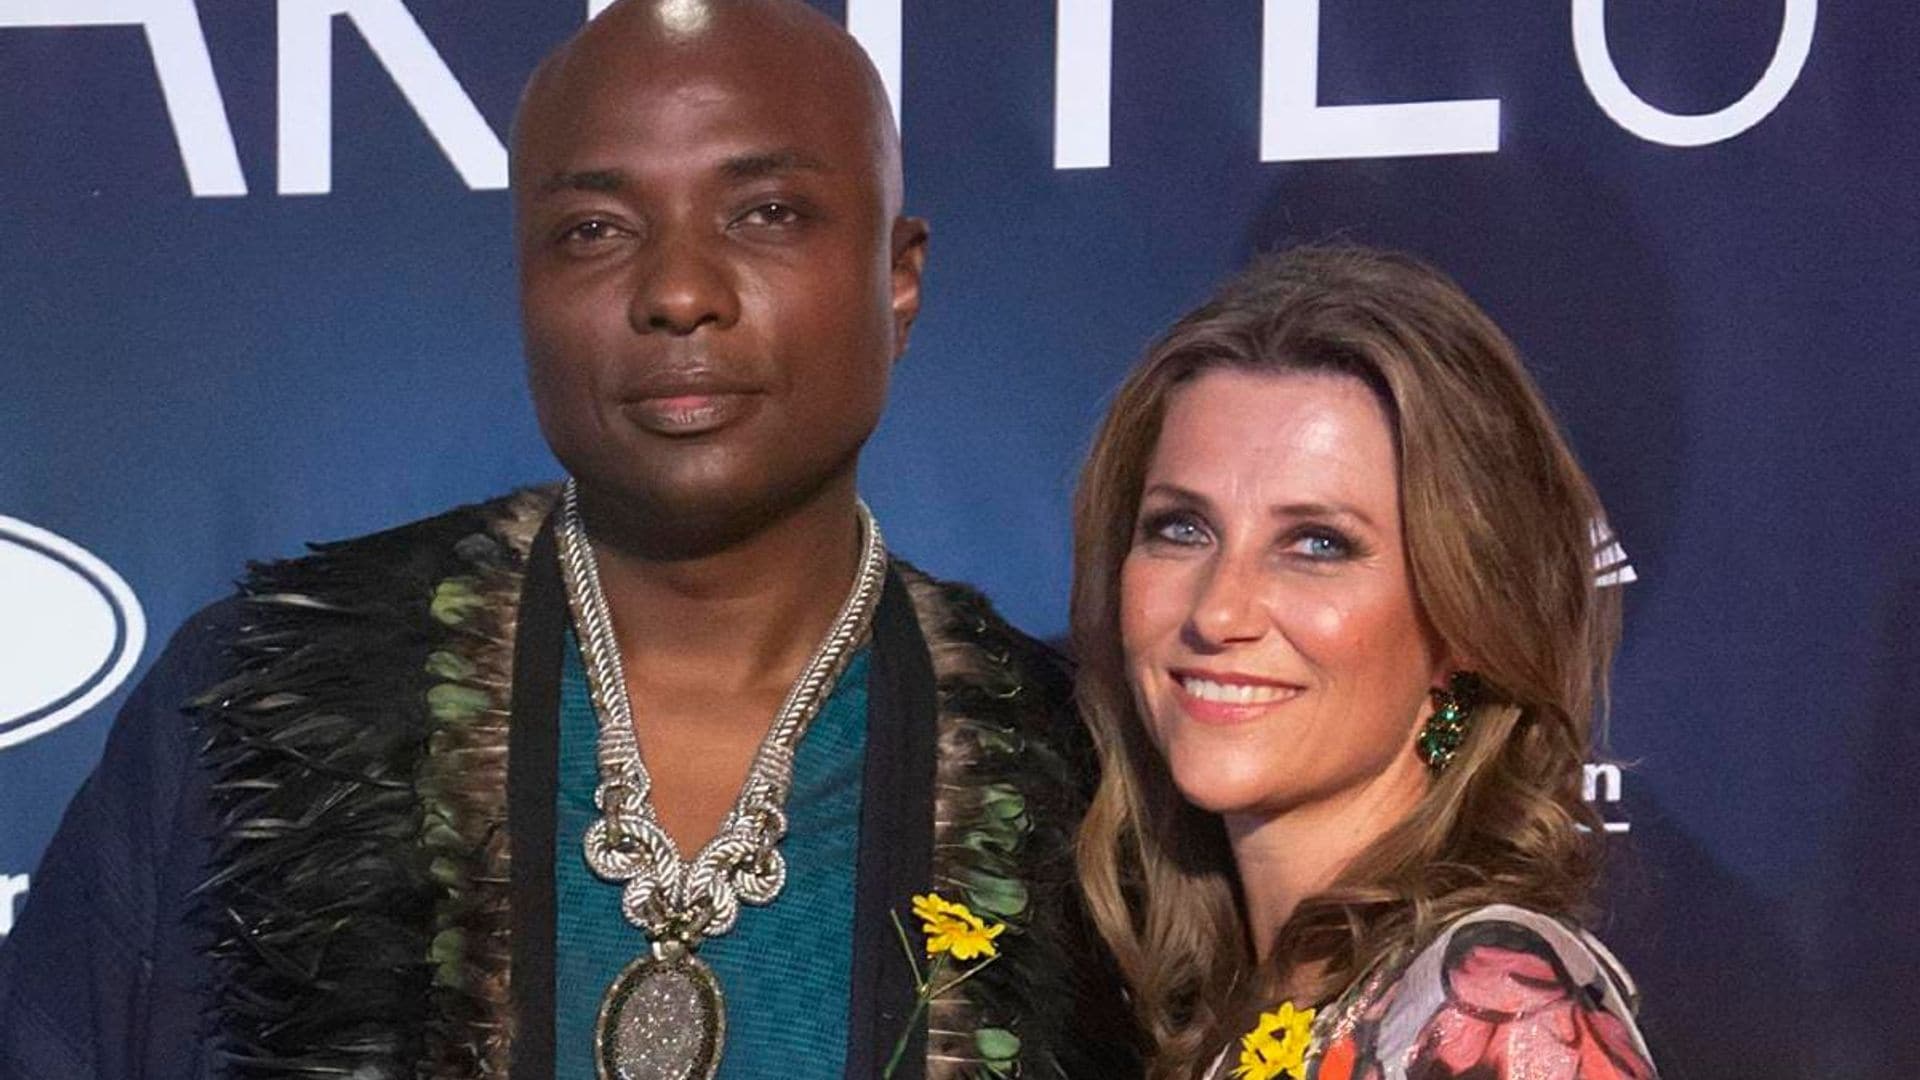 Princess Märtha Louise announces engagement to Shaman Durek: ‘Love transcends and makes us grow’